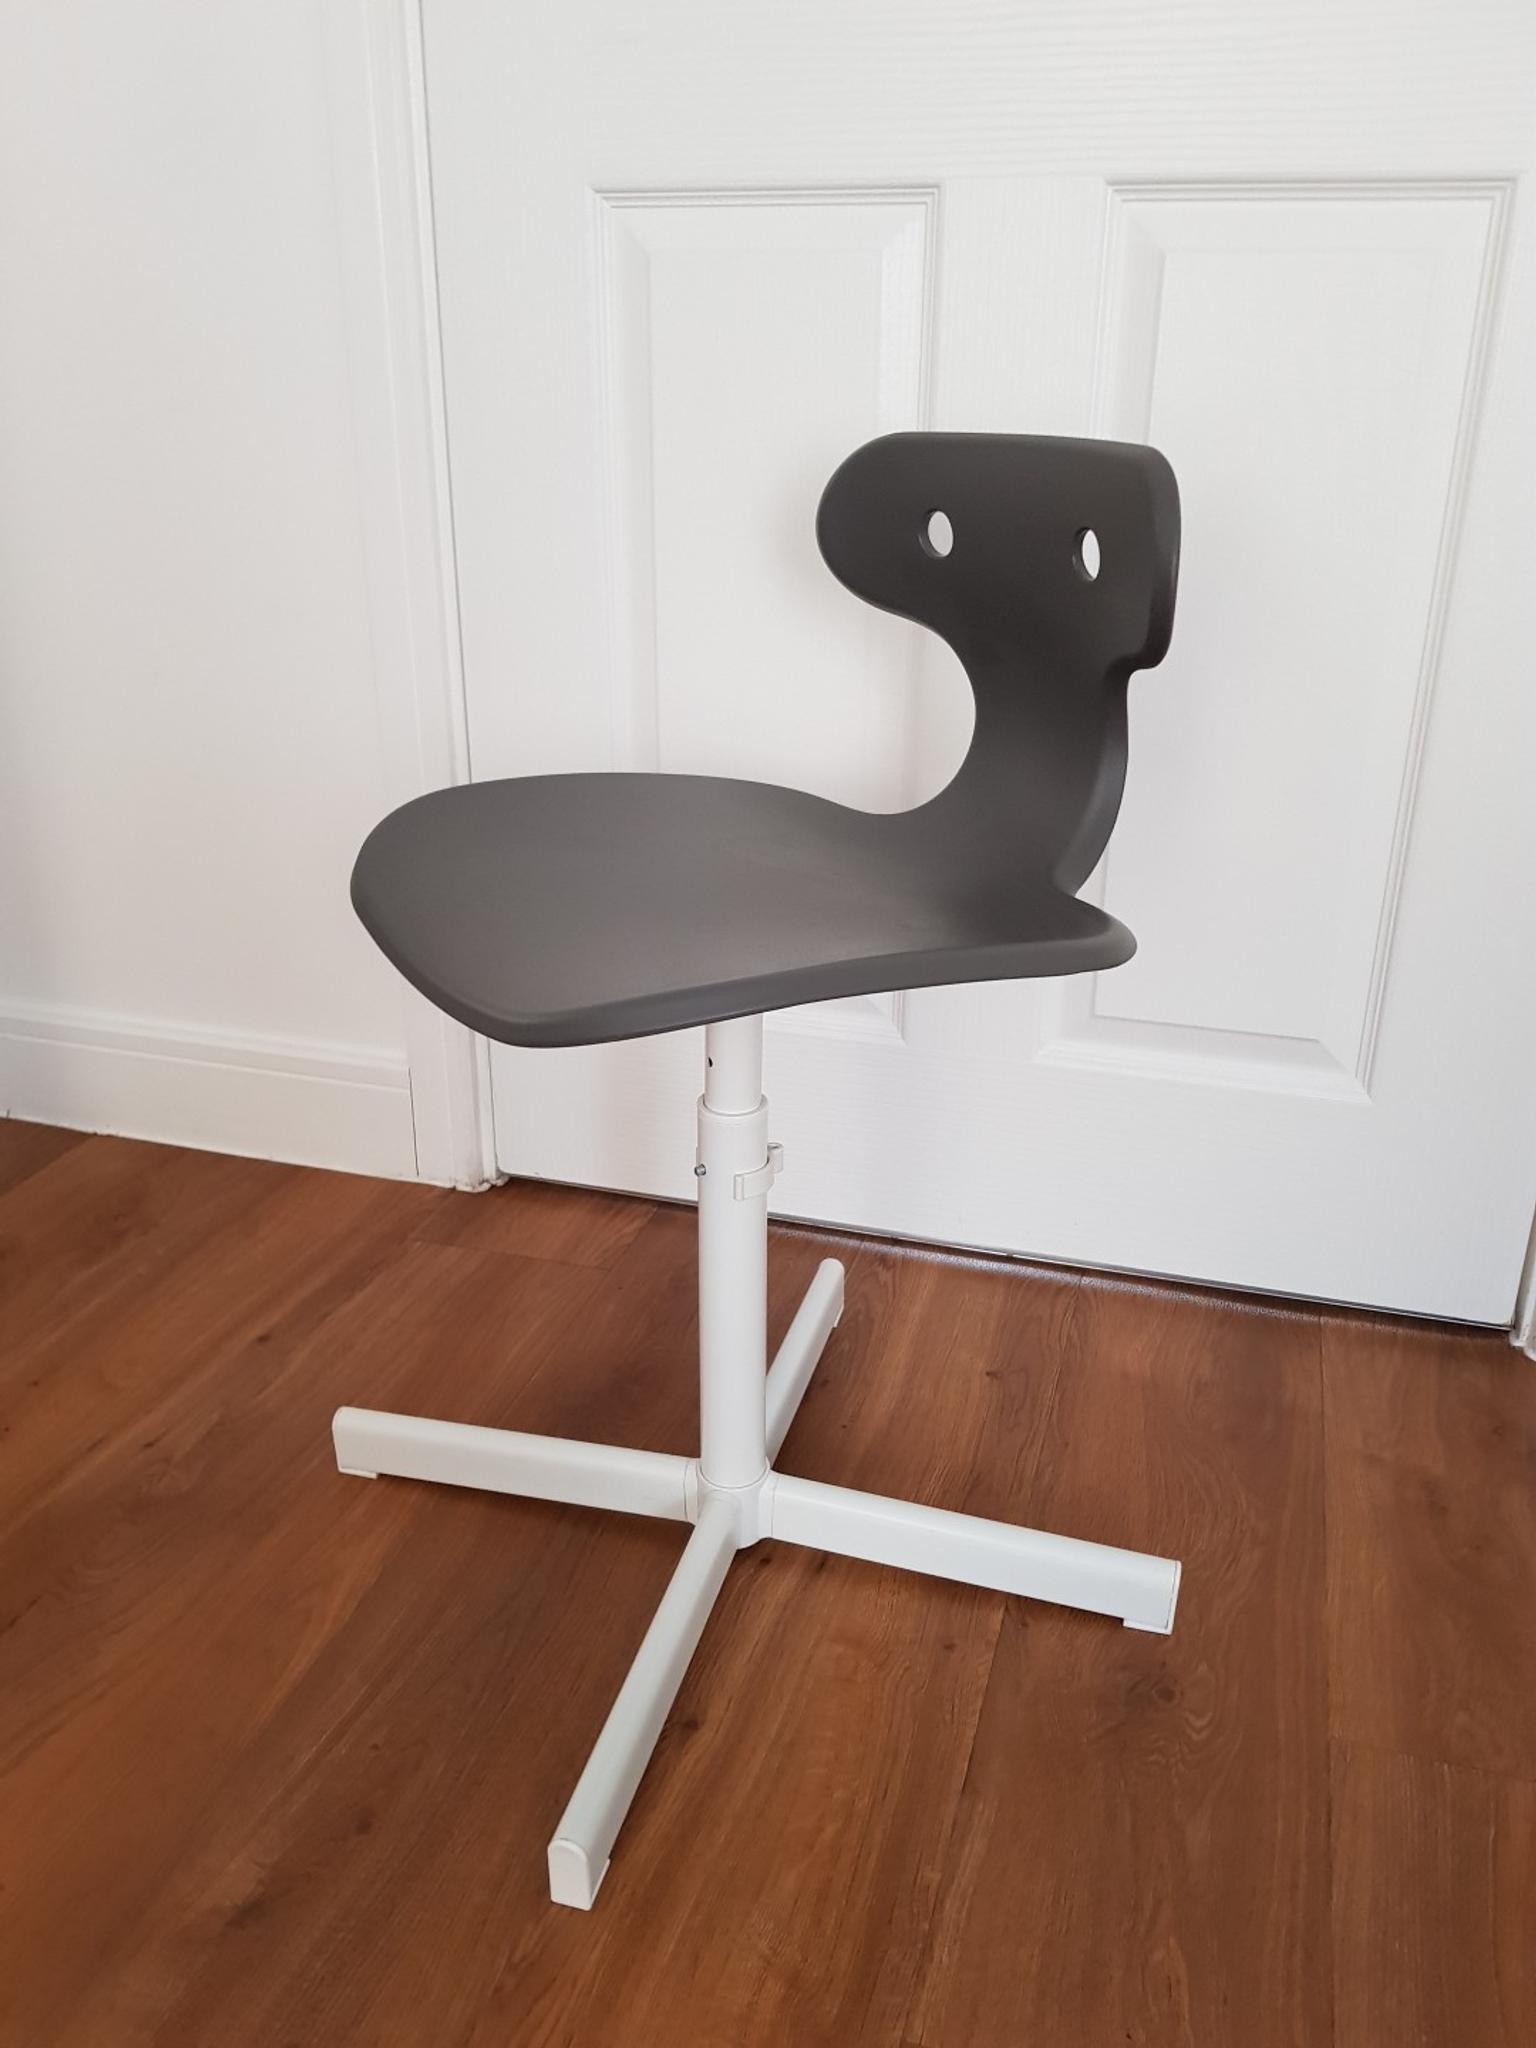 ikea childs desk and chair